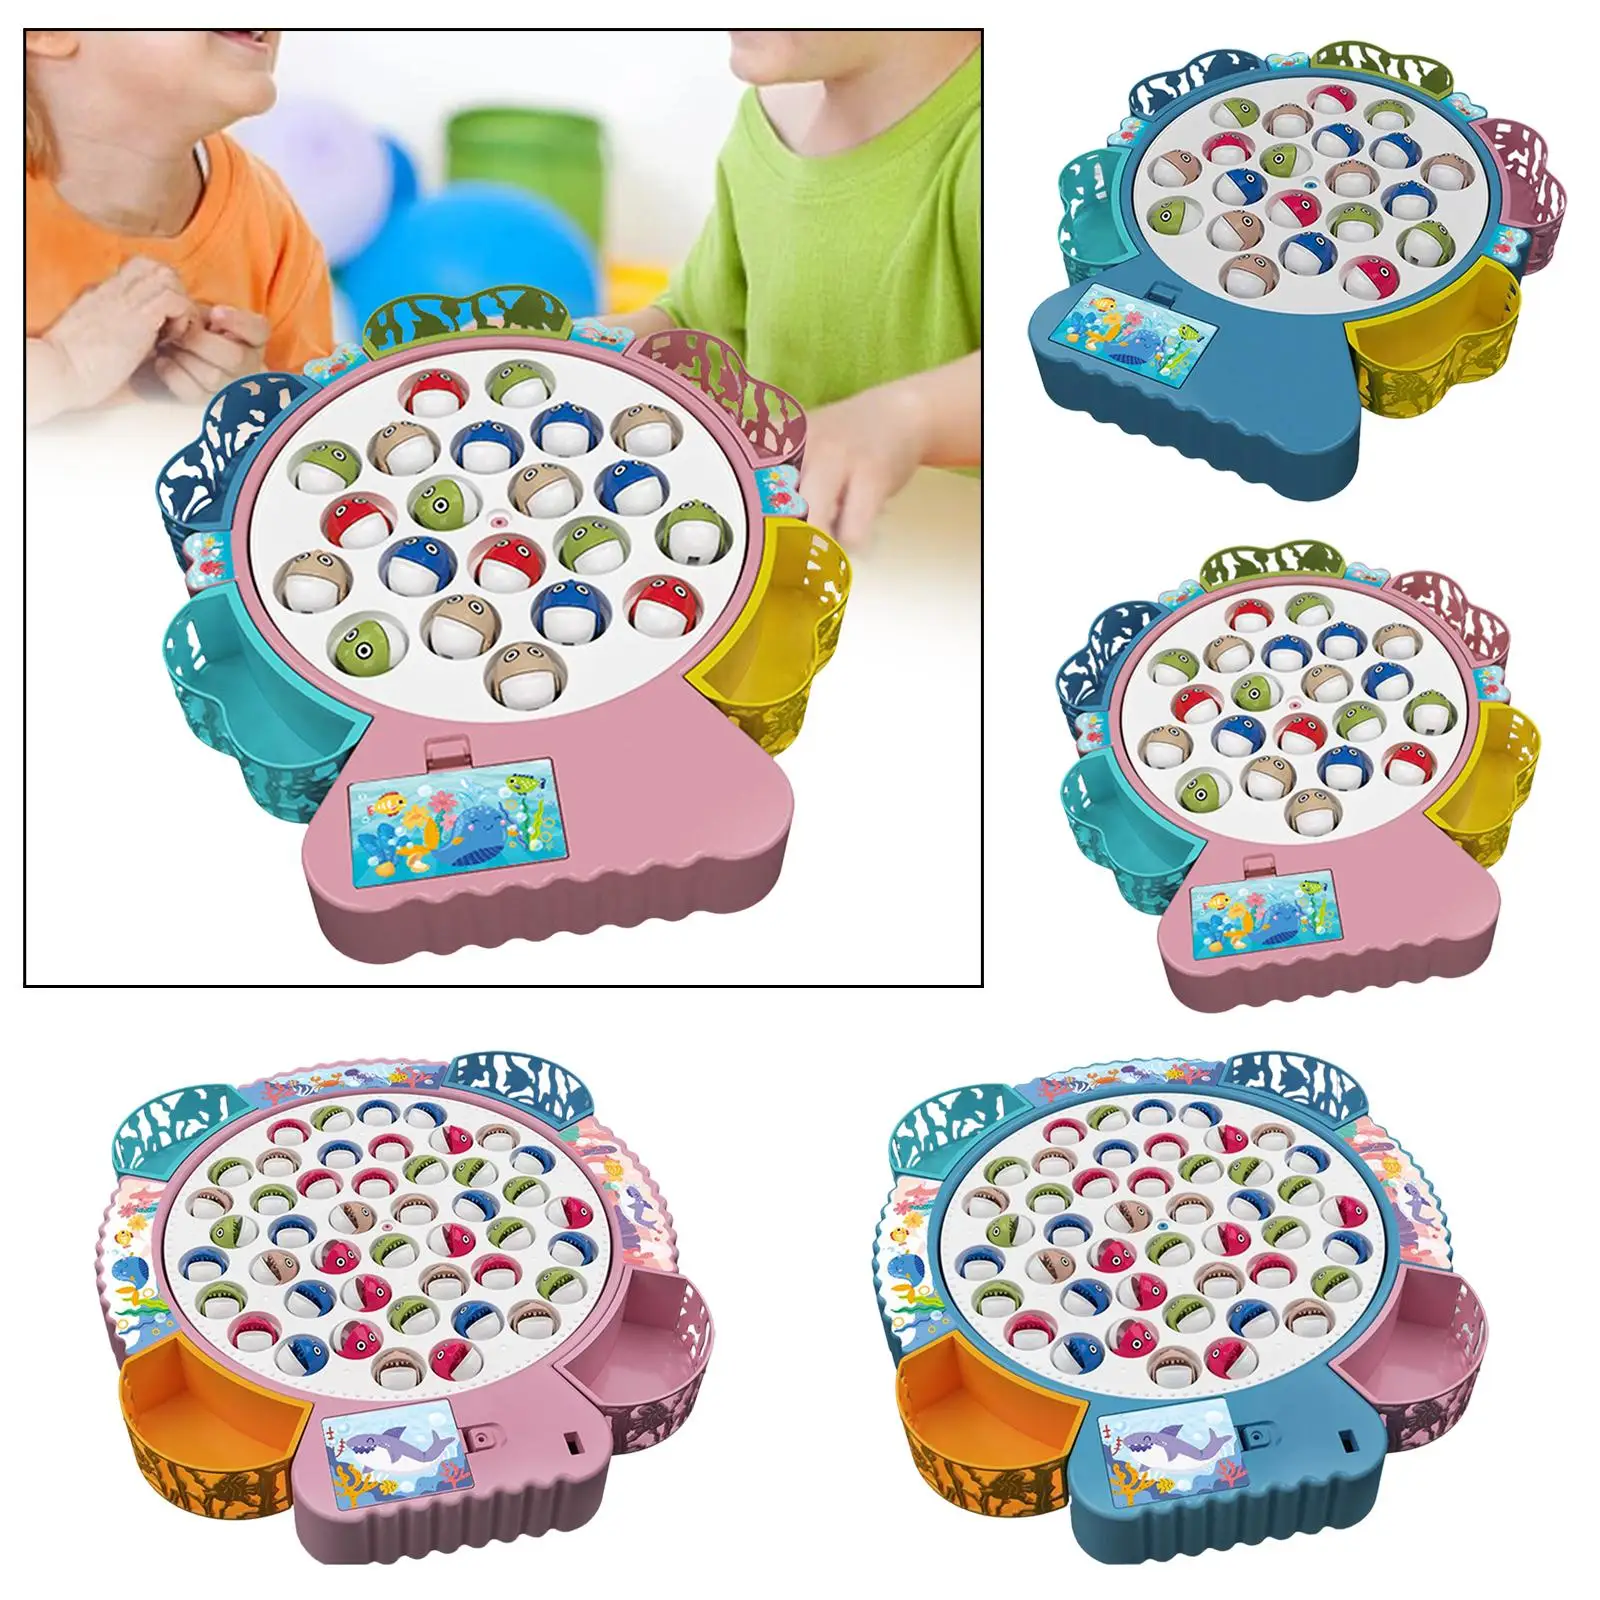 Rotating Fishing Game with 4 Fishing Poles Colorful Fine Motor Skills for Family Toddlers Preschool Party Favors Age 3 and up